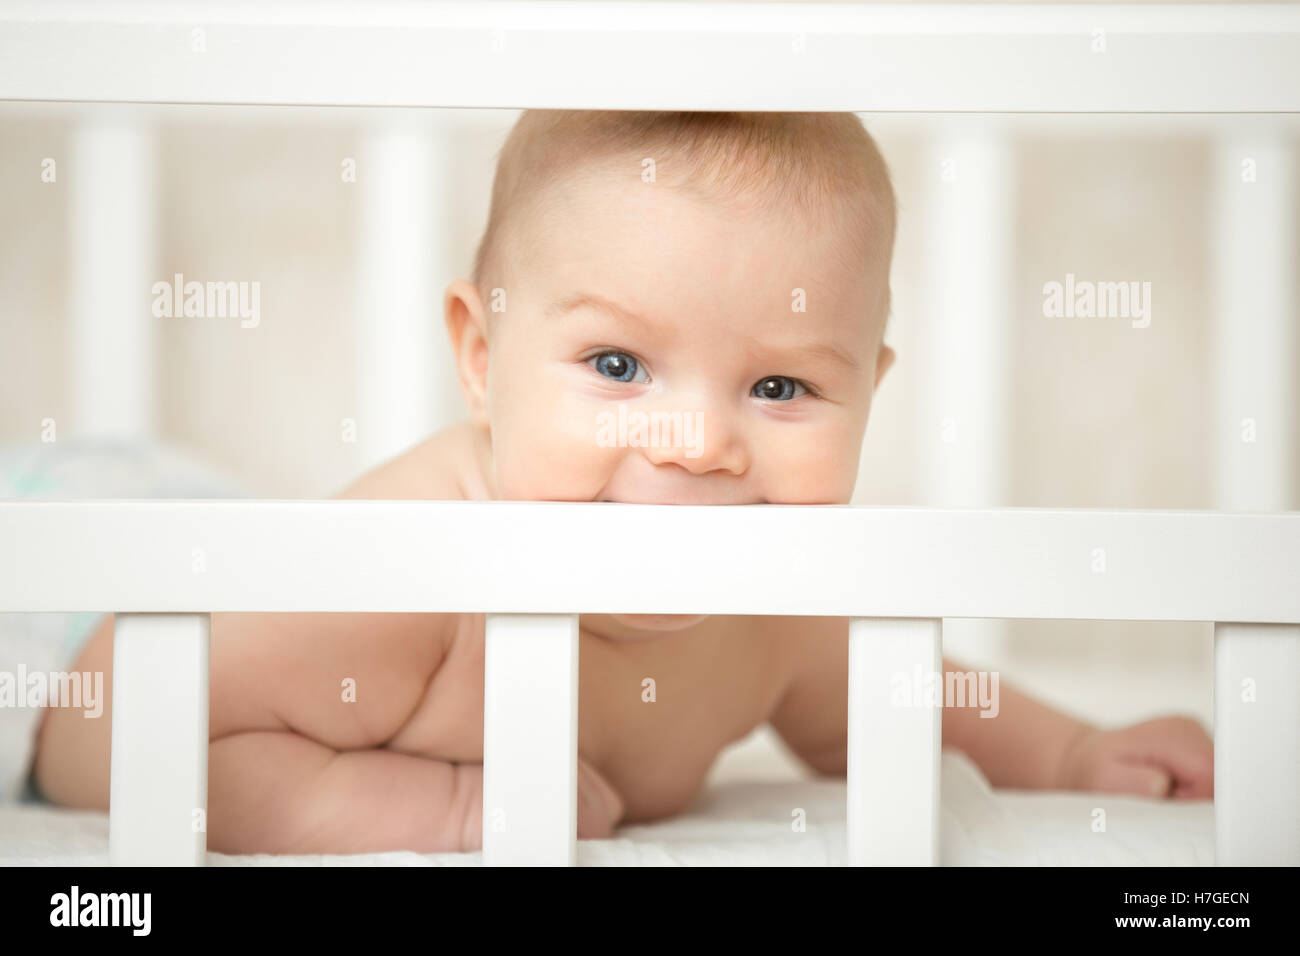 Cute child looking interested through the frame of baby crib Stock Photo